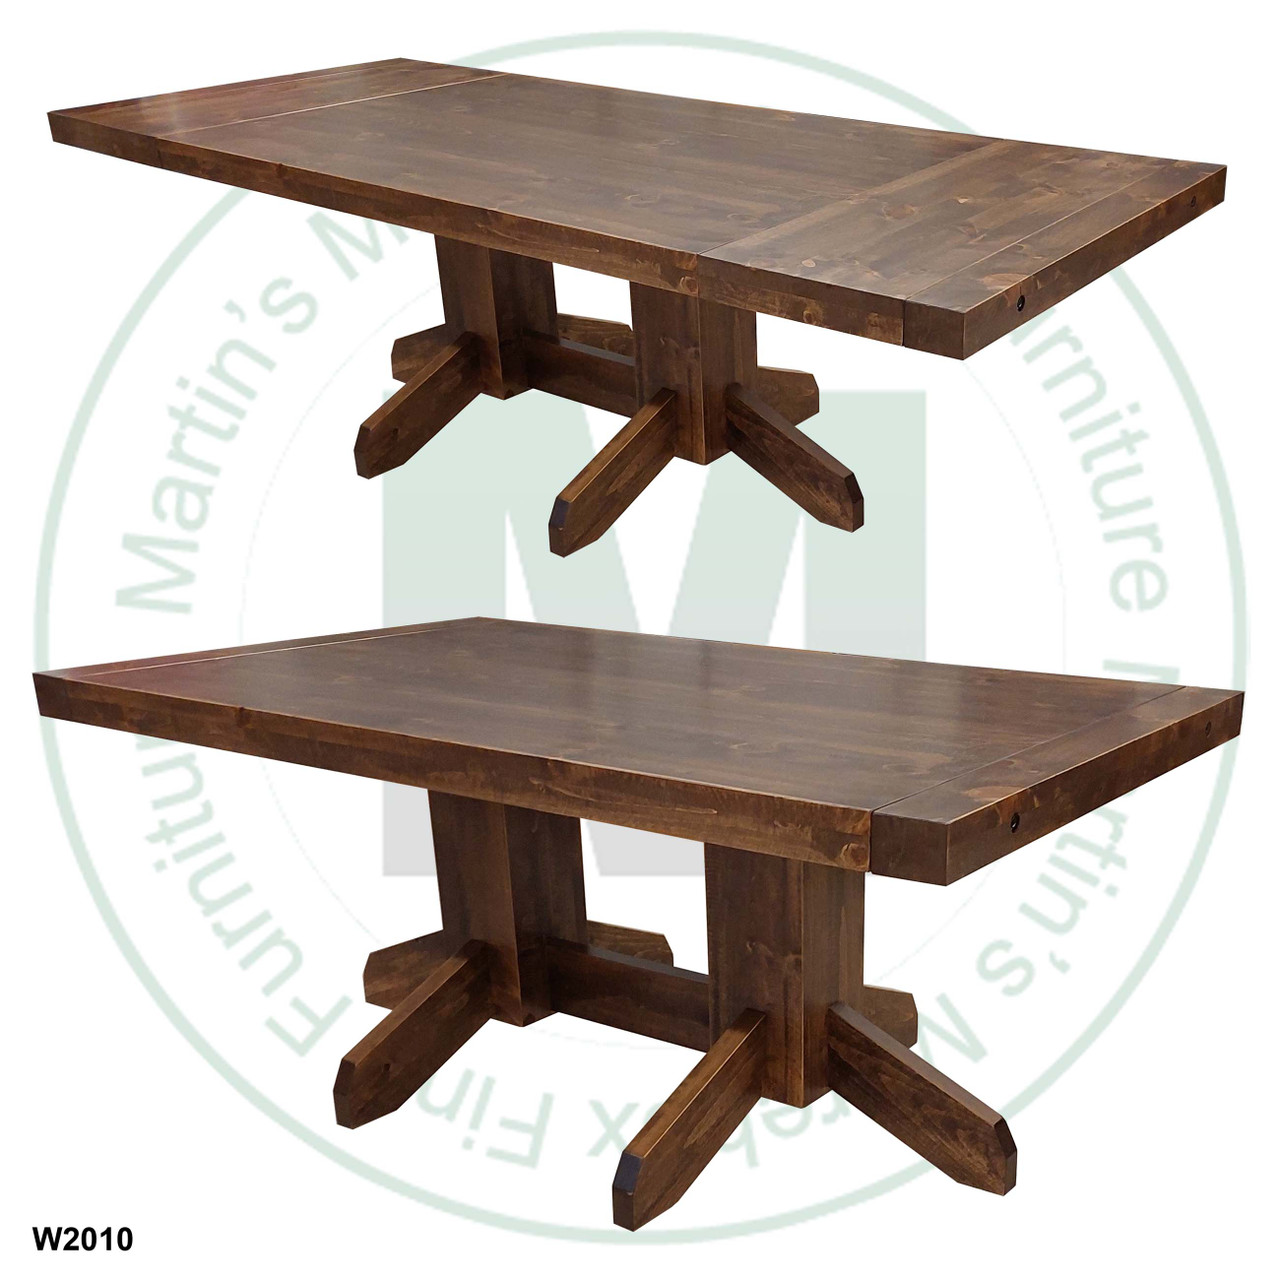 Maple Yukon Solid Top Double Pedestal Table 48'' Deep x 60'' Wide x 30'' High With 2 - 16'' End Leaves